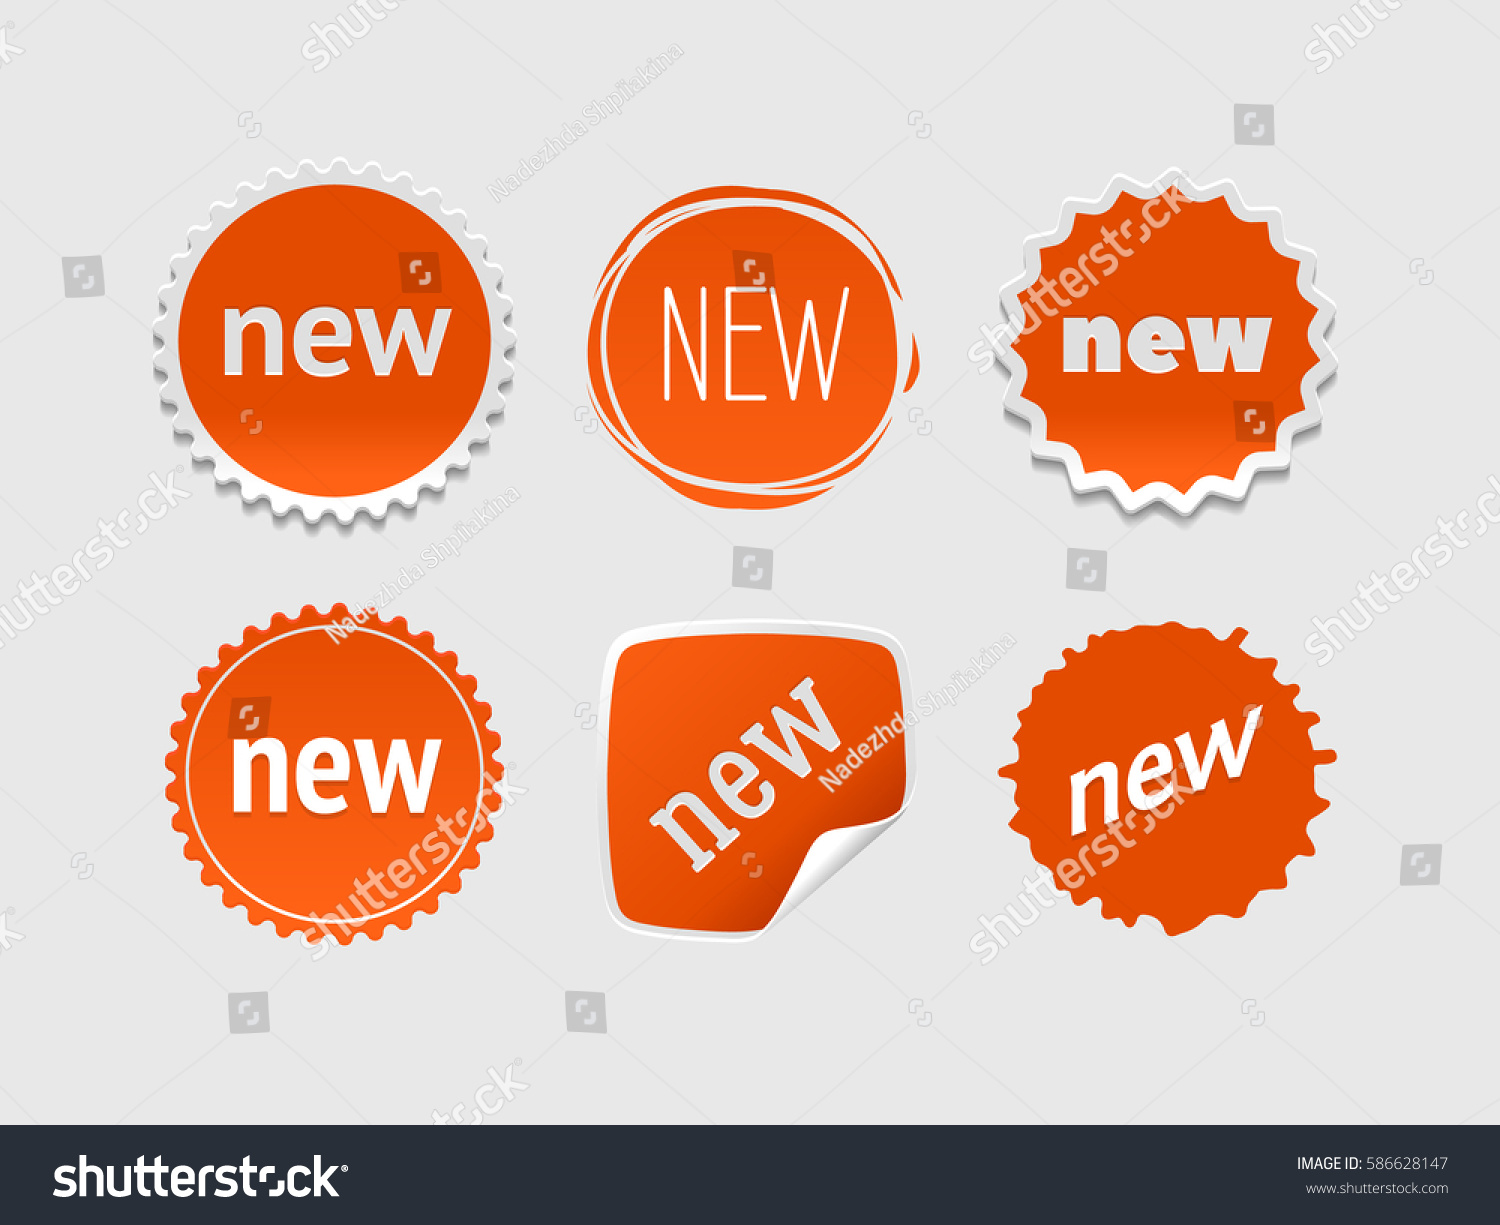 New sticker set. Vector sale banner for web store. Product stickers with offer. Promotional corner located element. Color splash label, tag, badge, icon with text. Accent promotion flyer, frame design #586628147